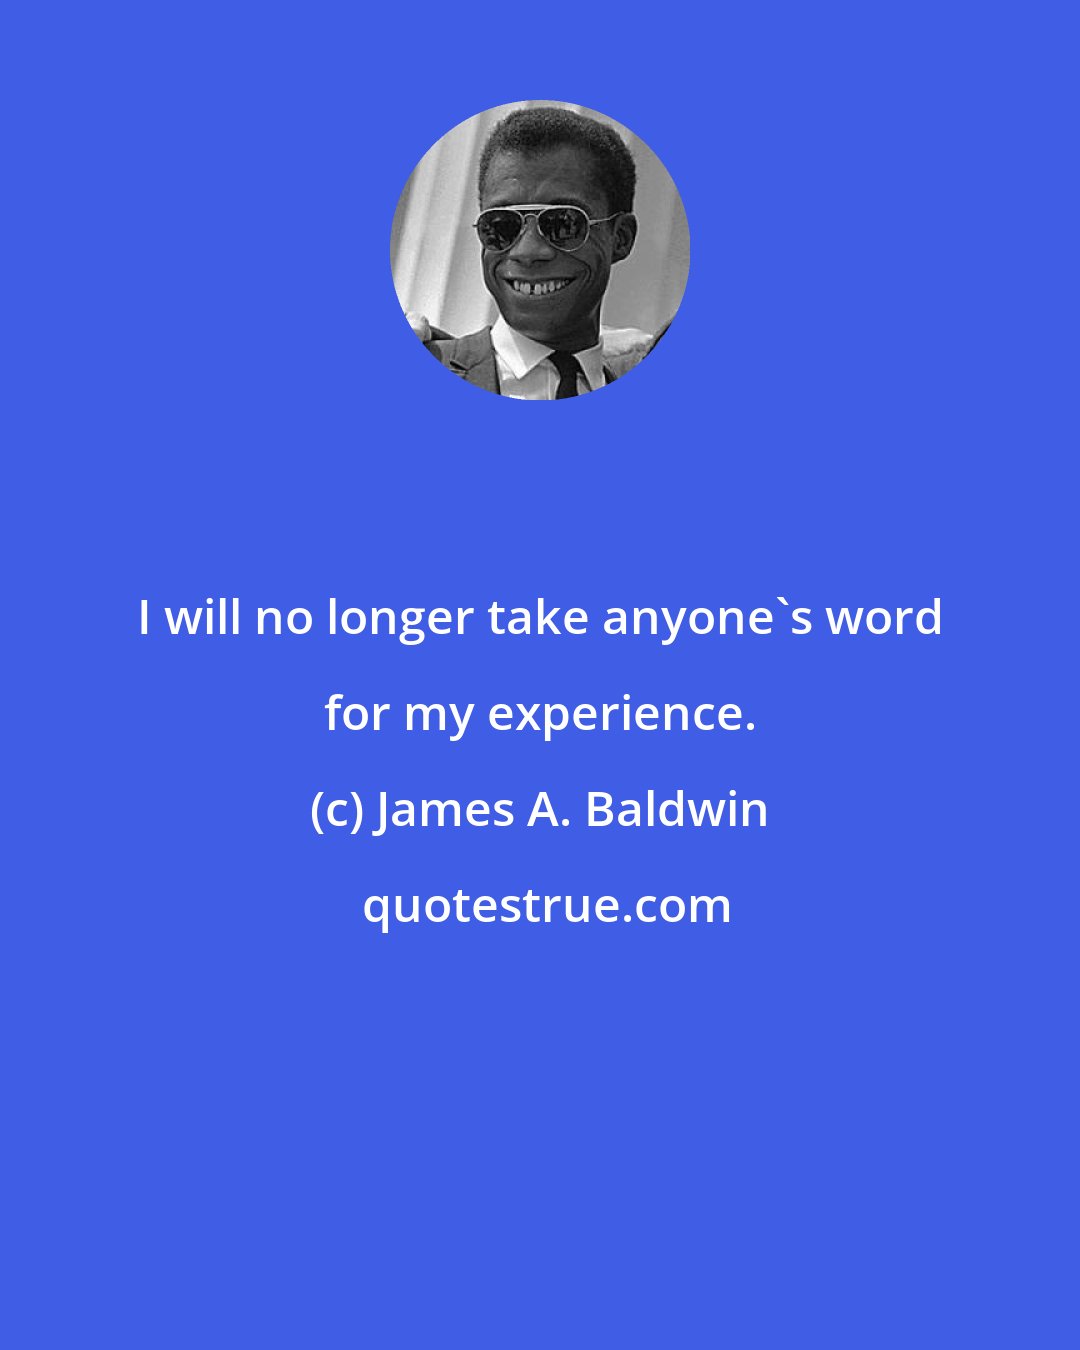 James A. Baldwin: I will no longer take anyone's word for my experience.